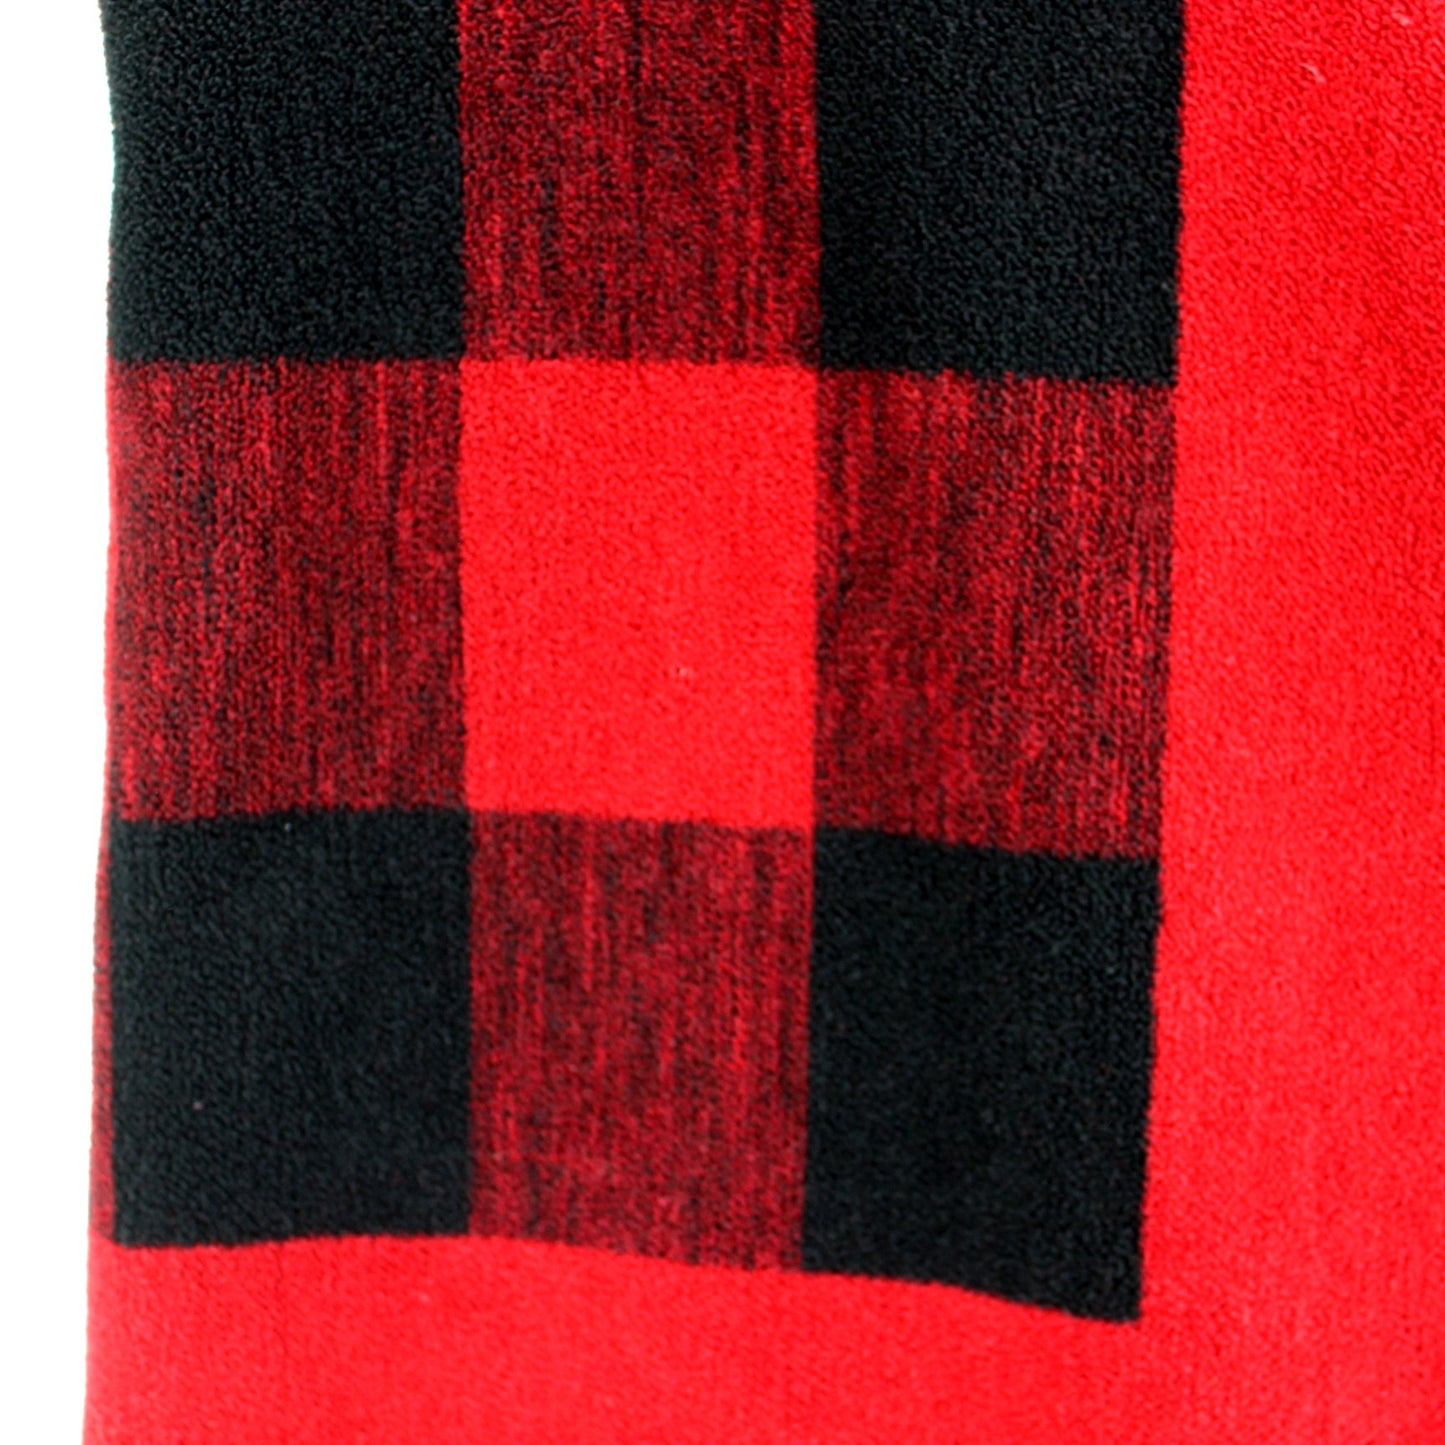 Woolrich Home Polyester Blanket Black Red Washable Large 80" X 74" closeup photo of design